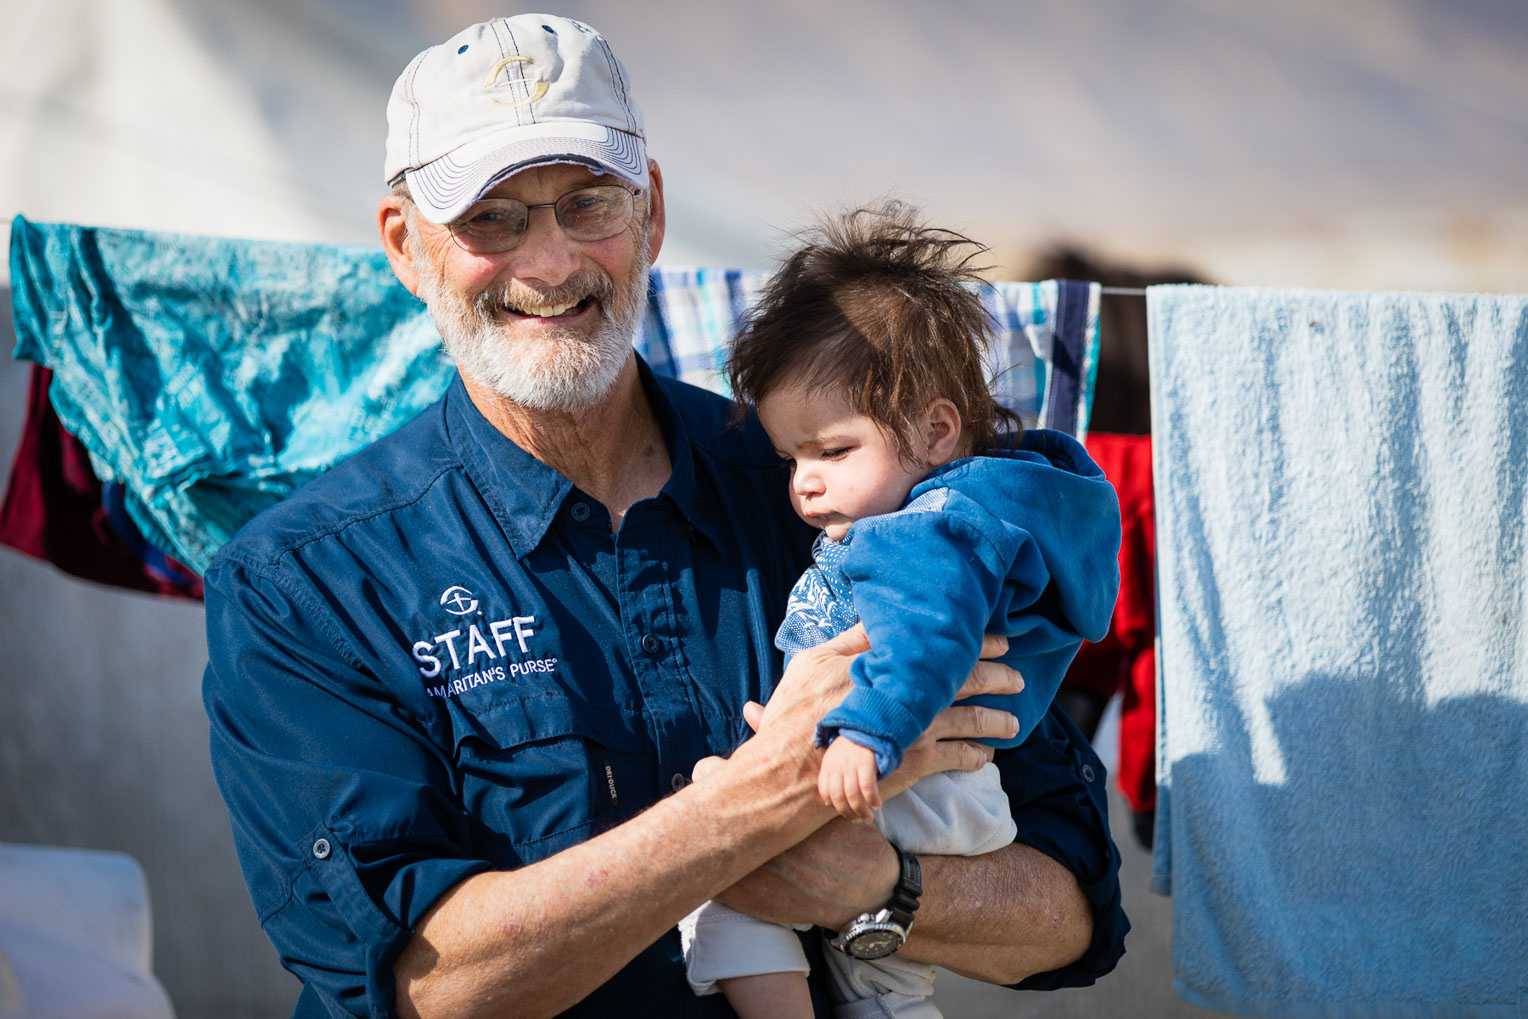 Samaritan's Purse disaster response specialists are caring for refugees in Bardarash camp in Jesus' Name.